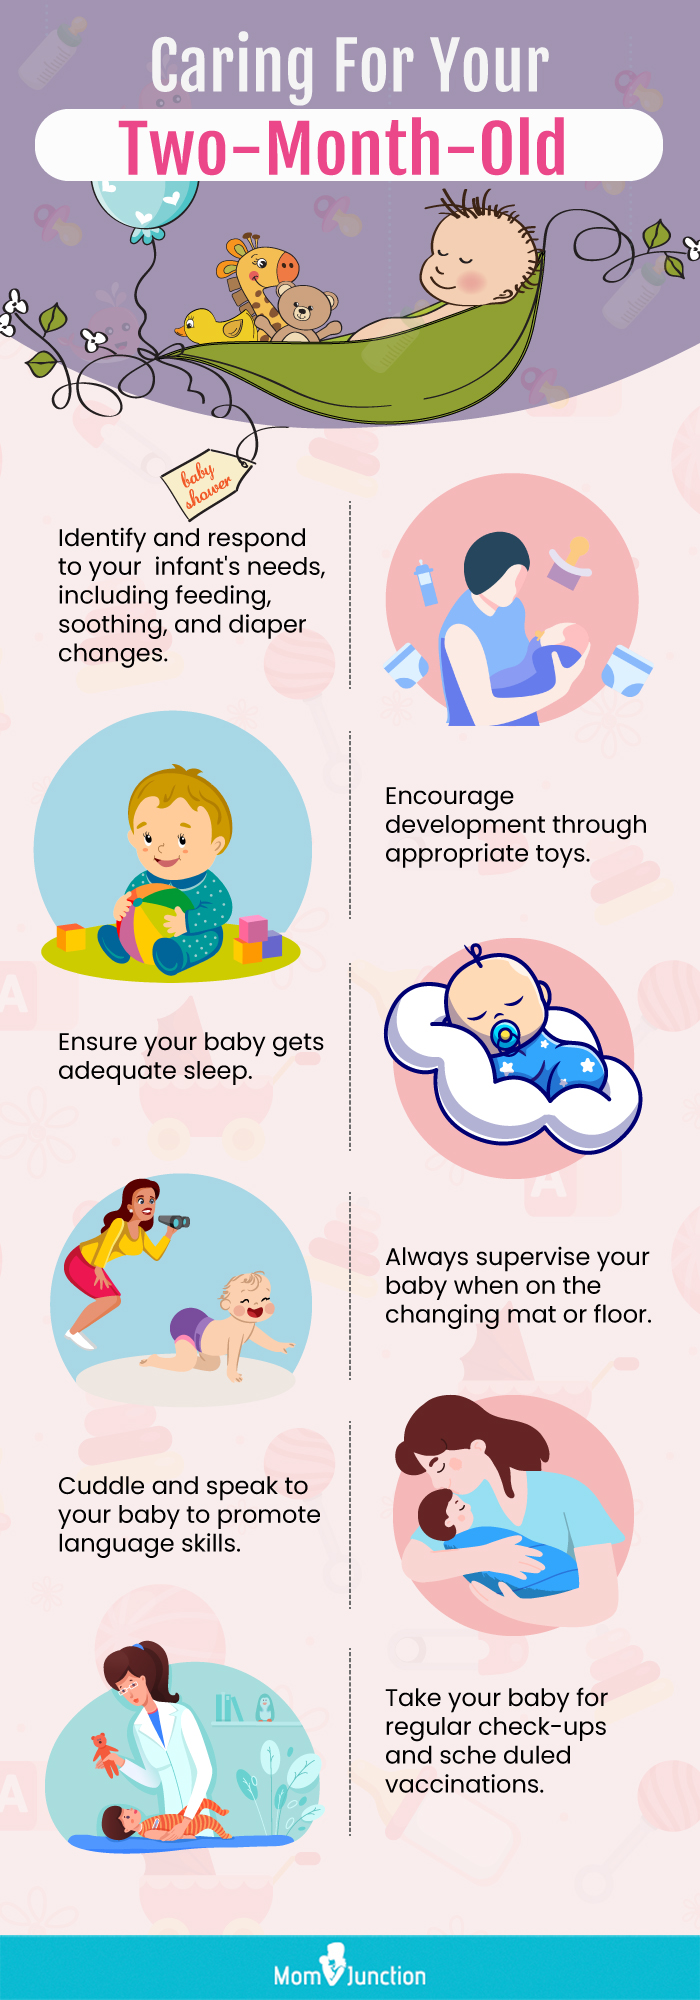 caring for your two month old (infographic)